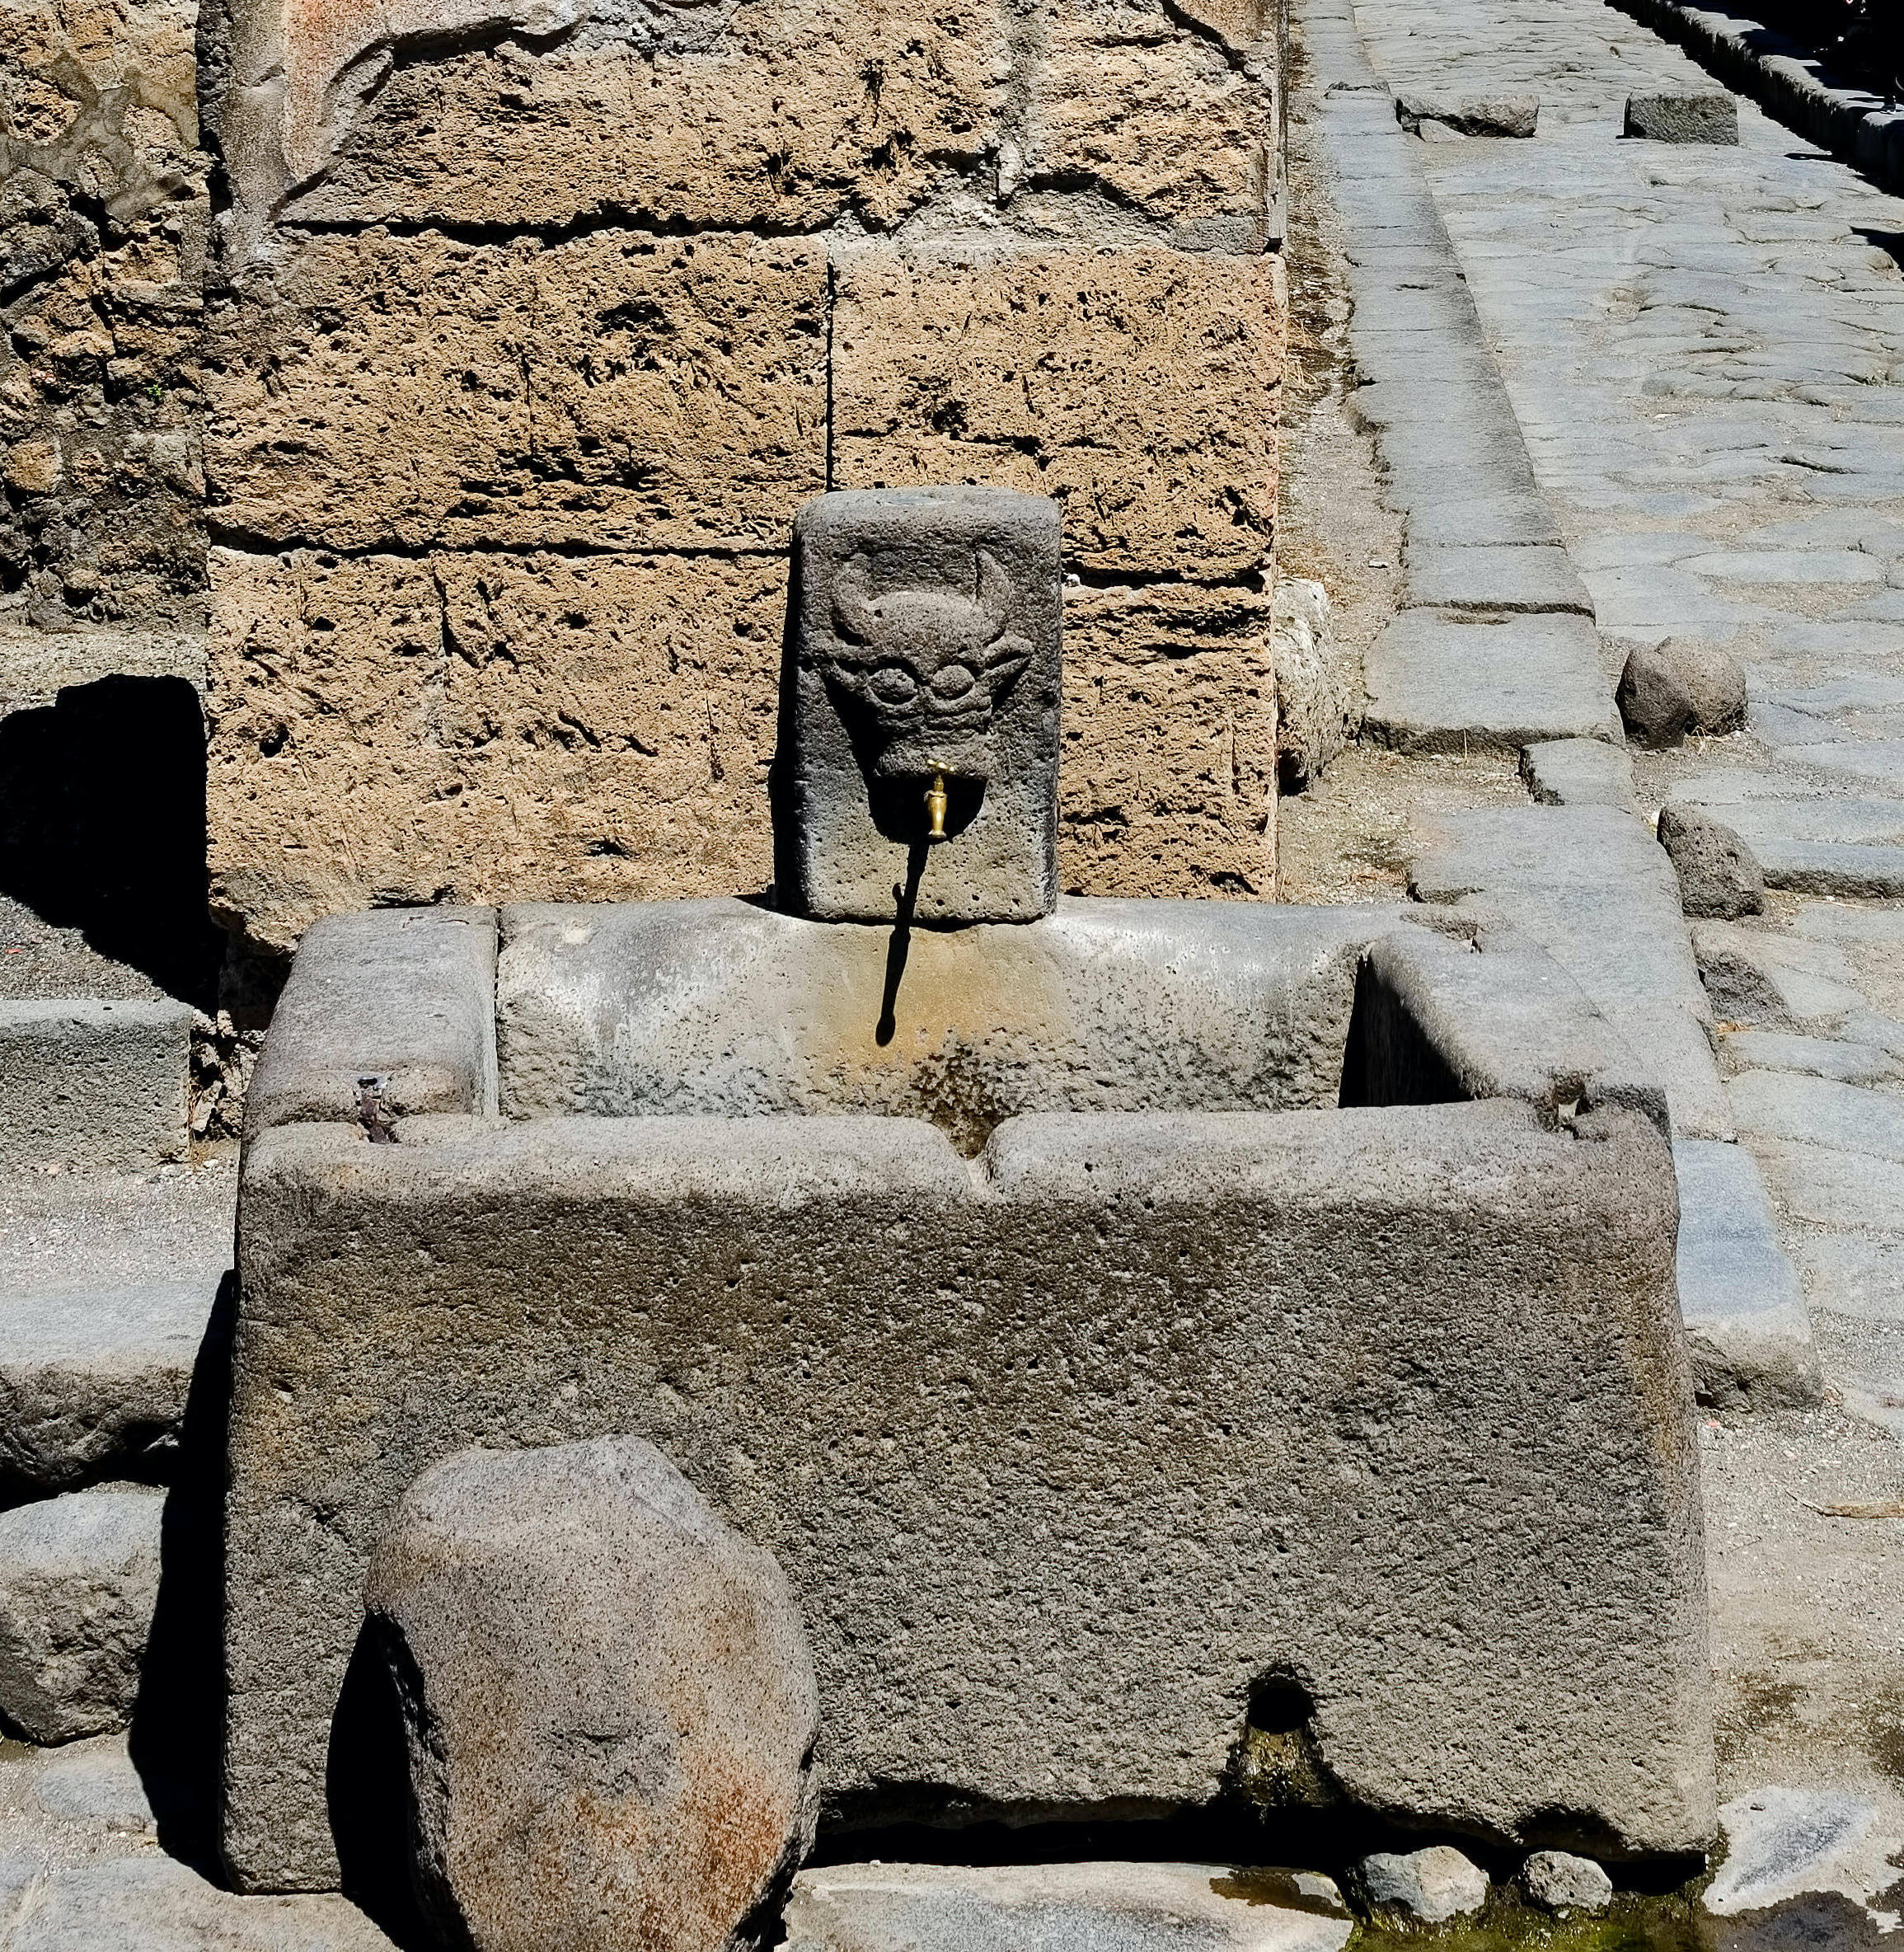 A stone water fountain on a street corner. The tap of the fountain is coming from the mouth of a carved bull head.